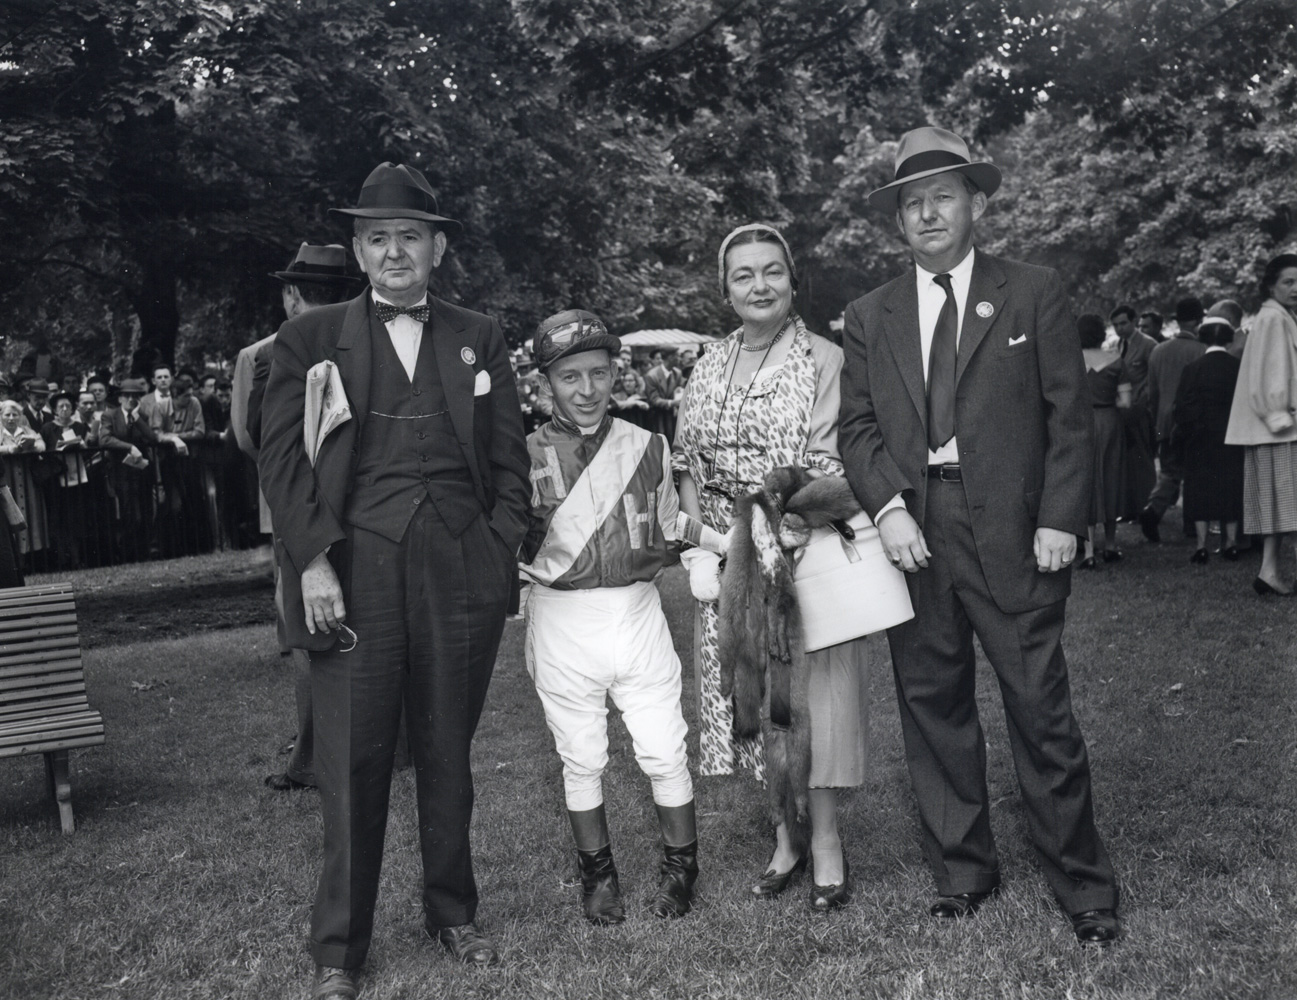 Mr. A. E. Reuben, jockey John Adams, Mrs. A. E. Reuben, and Harry Trotesk in the paddock at Belmont, May 1954 (Keeneland Library Morgan Collection/Museum Collection)